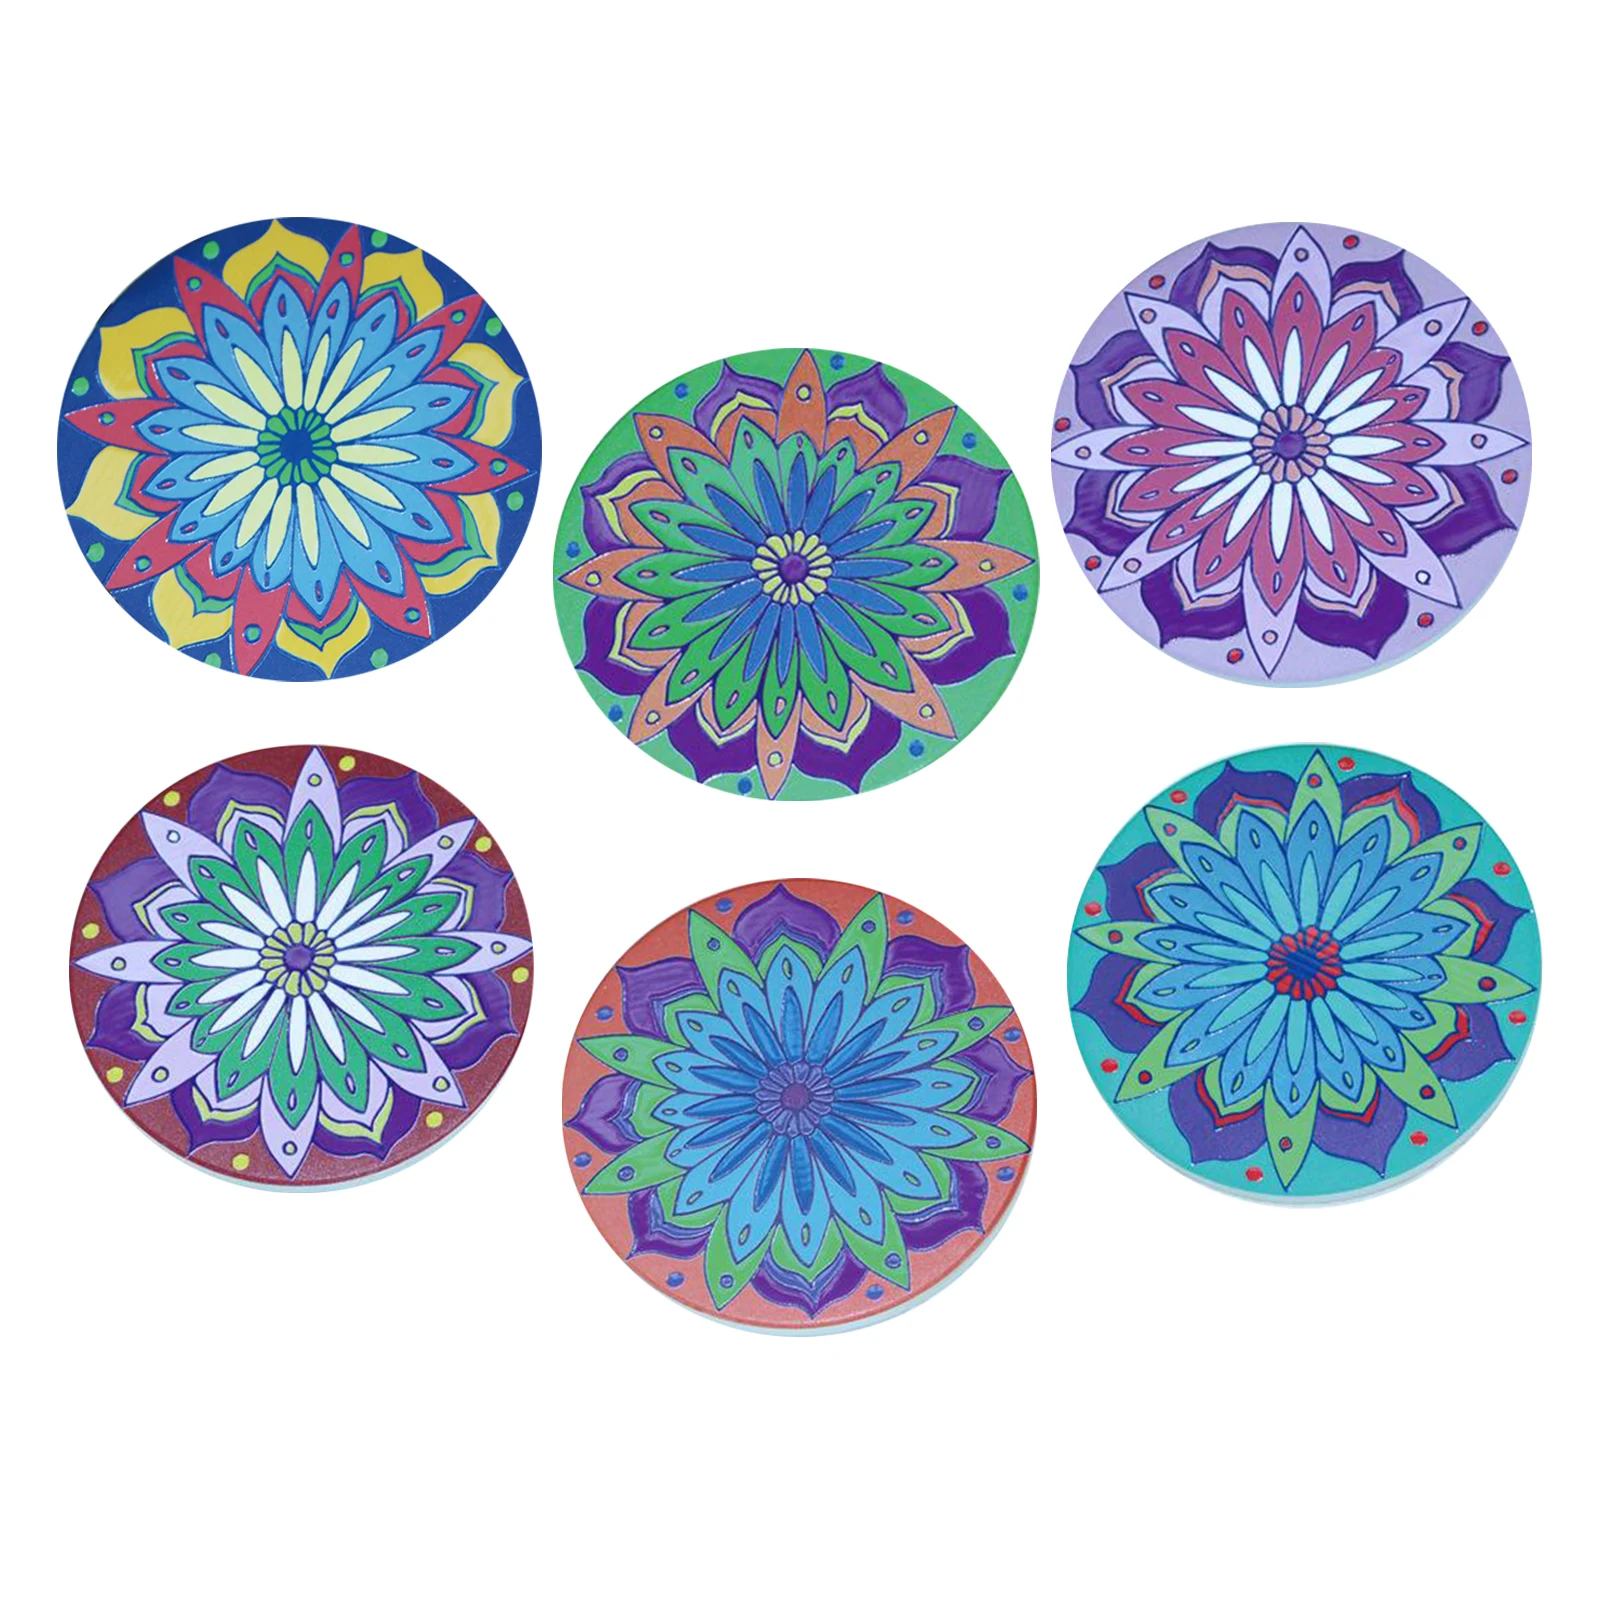 Ceramic Stone Mandala Floral Coasters for Wooden Table Cork Base Cup Pads for Gifts Dining Room Room Bar Decor